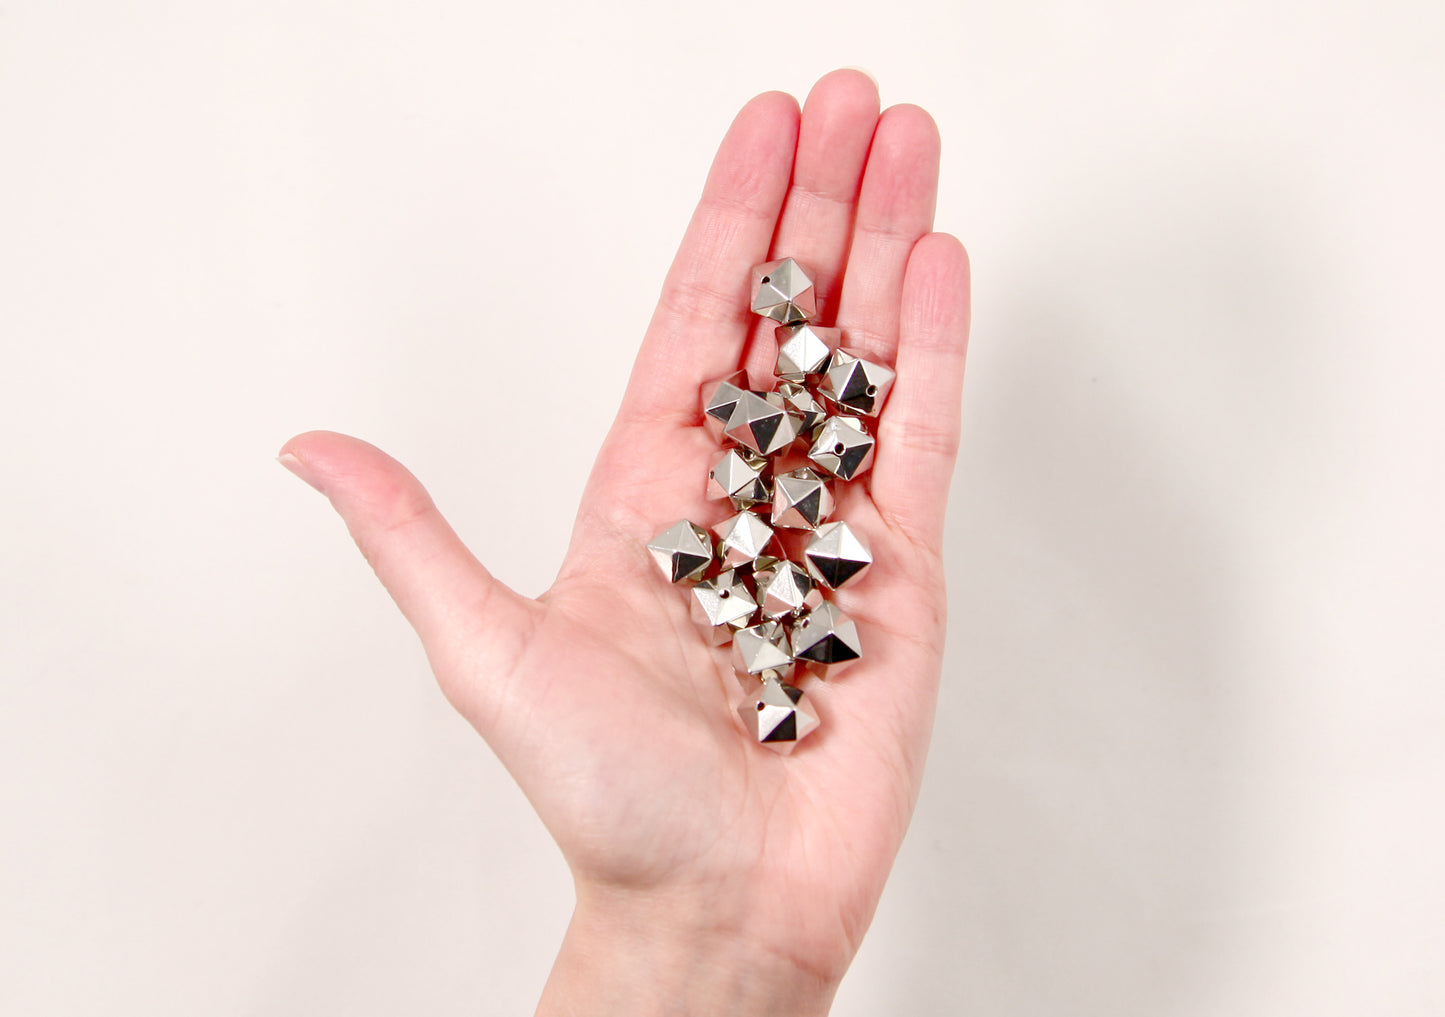 Spike Beads - 25 pc set - 17mm Spiky Stud Bead - Electroplated Silver - Drilled with Holes to Easily make Jewelry